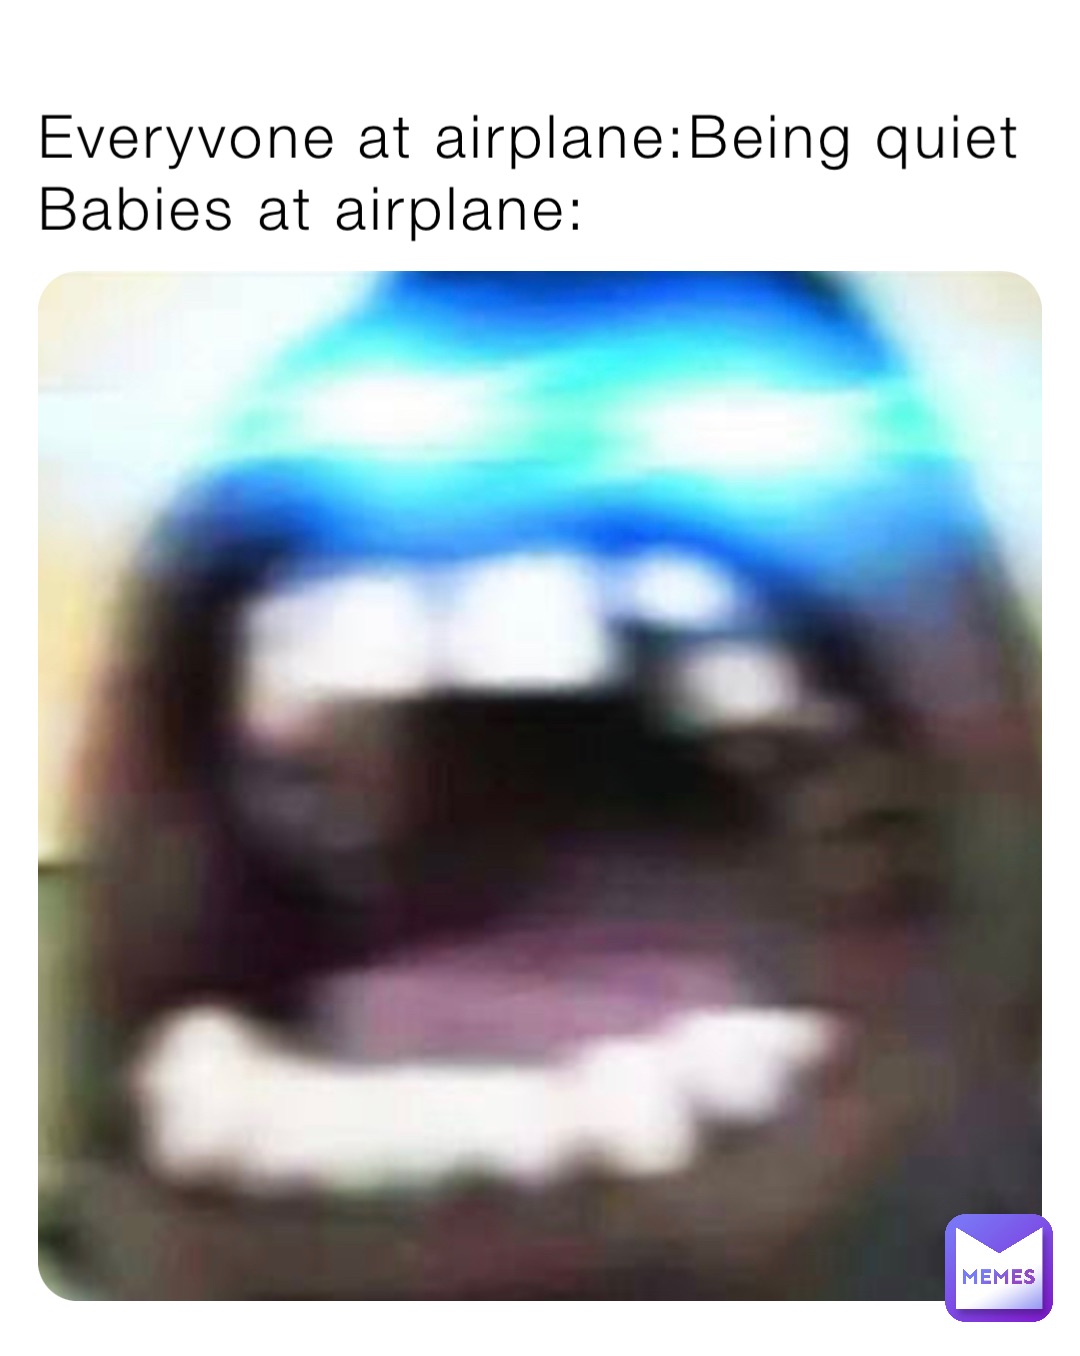 Everyvone at airplane:Being quiet
Babies at airplane: